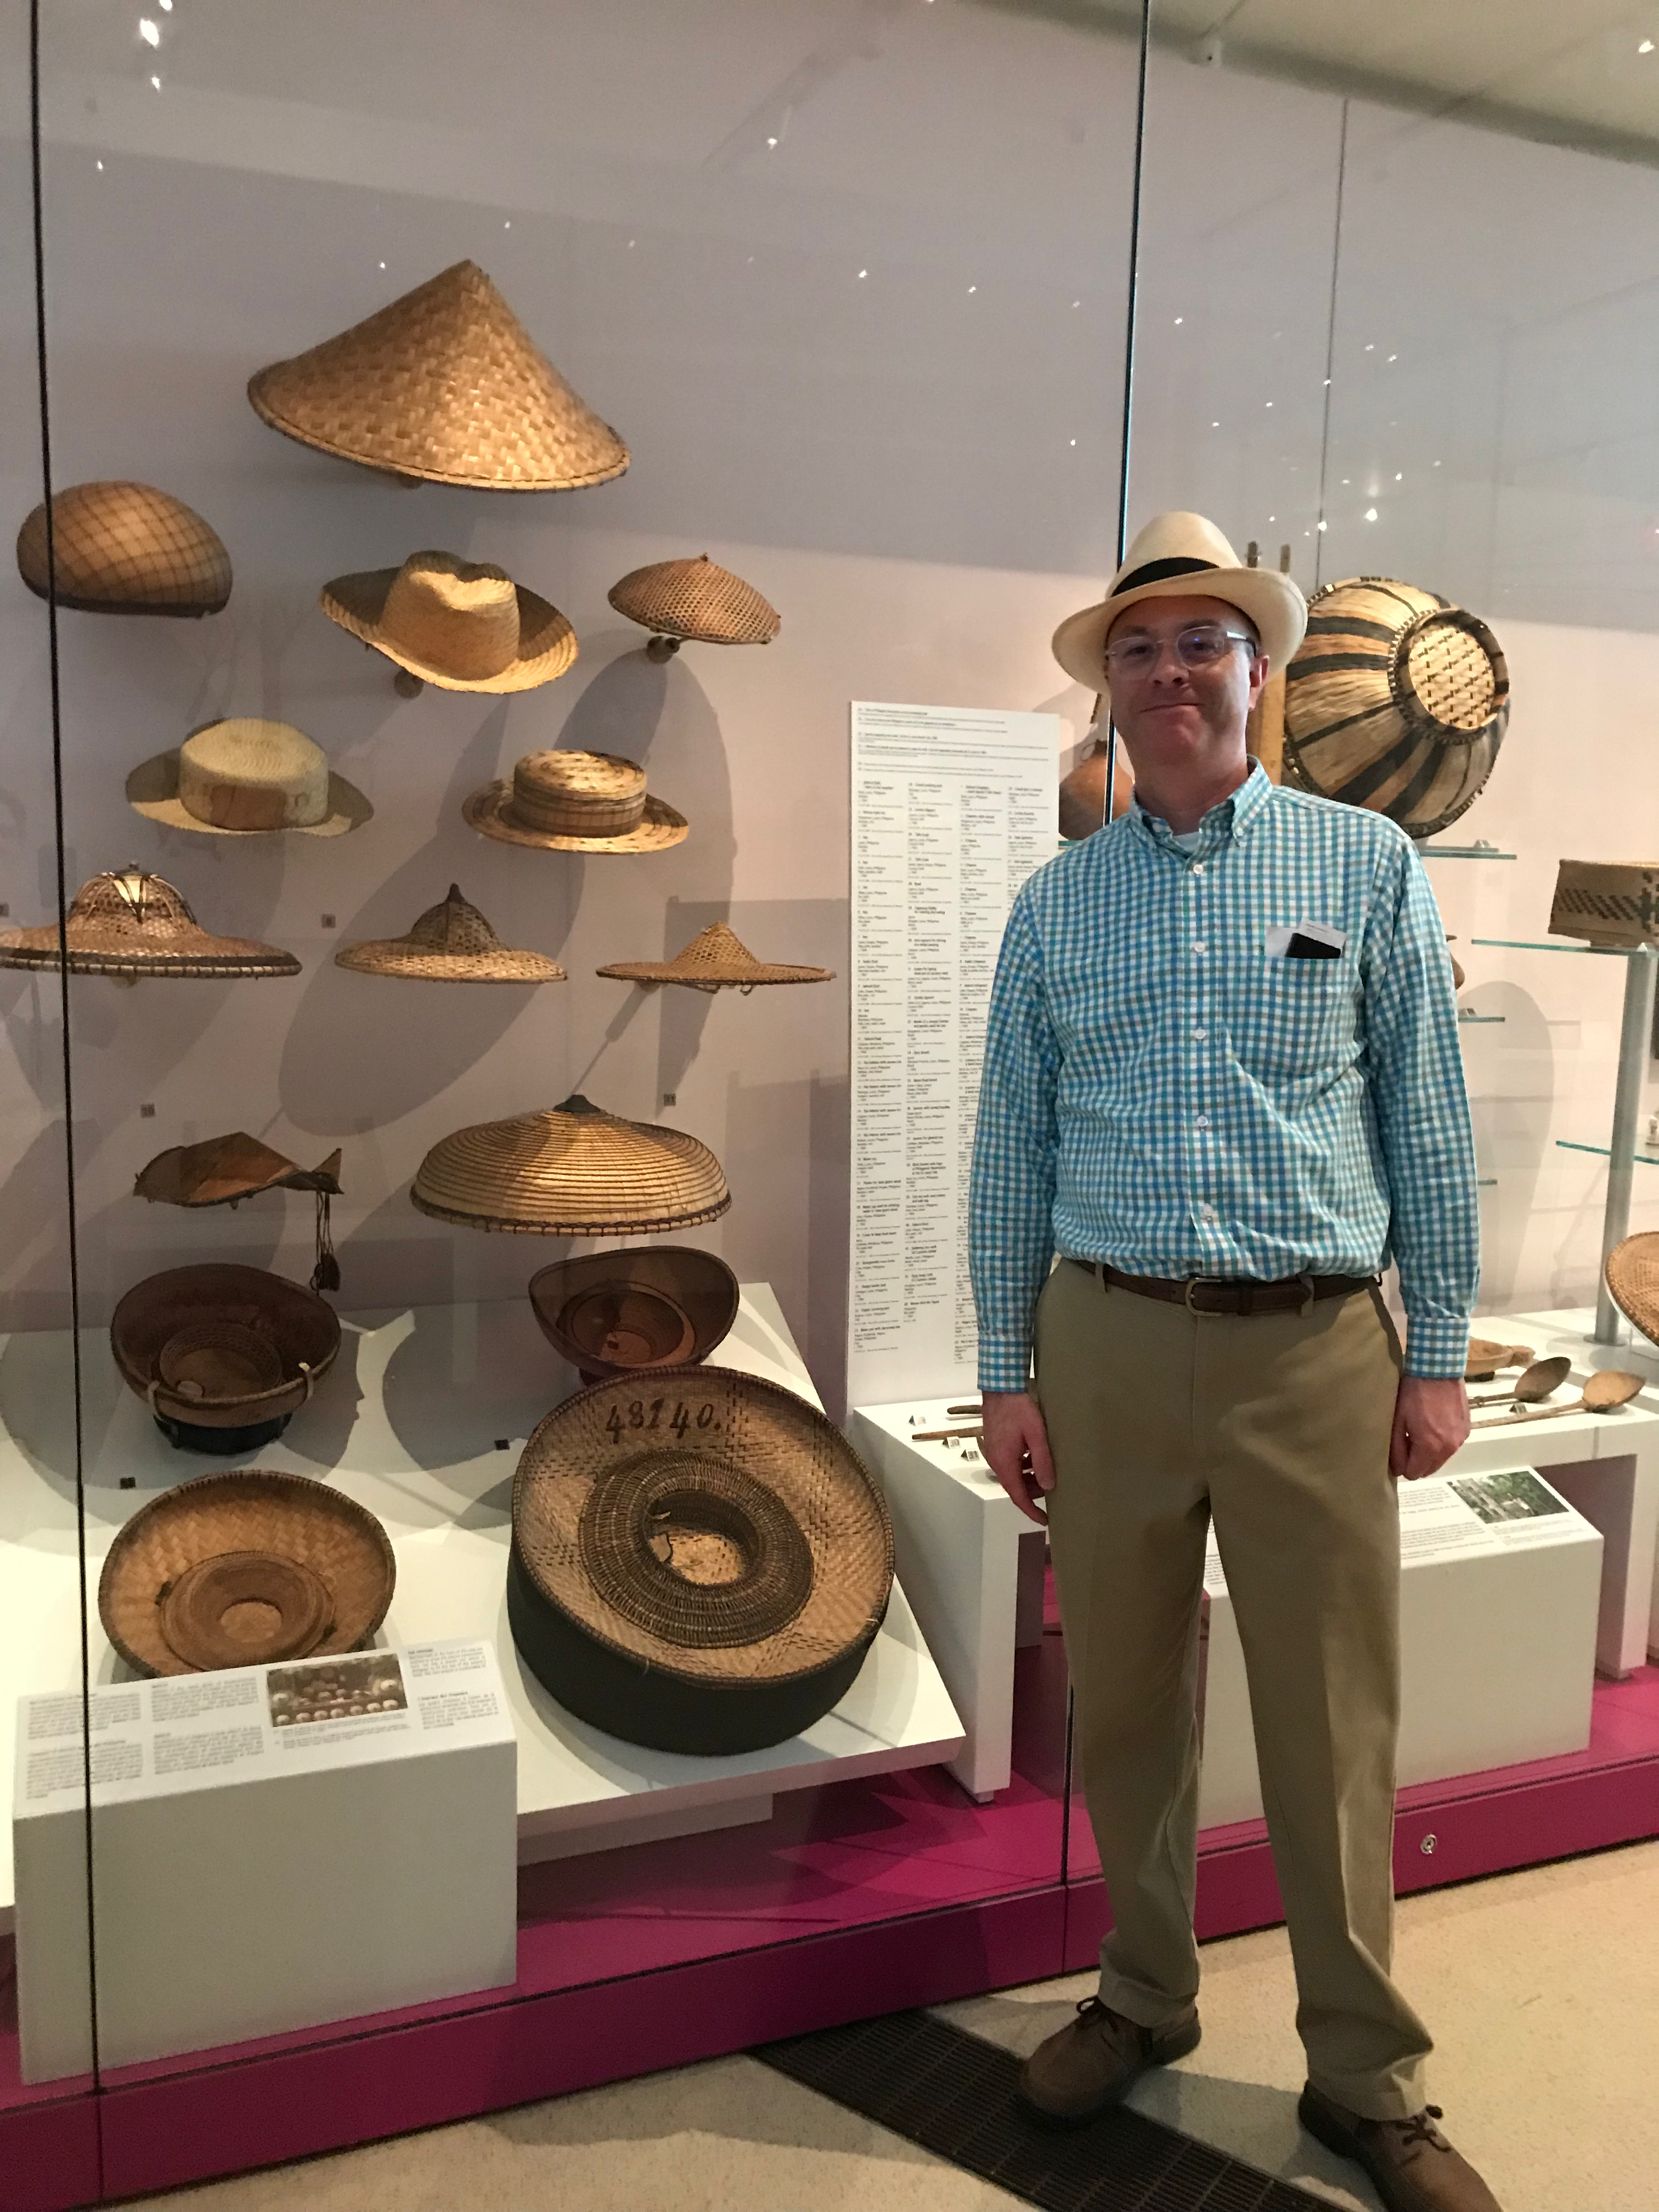 Admiring the Hats at the American Museum of Natural History in NYC